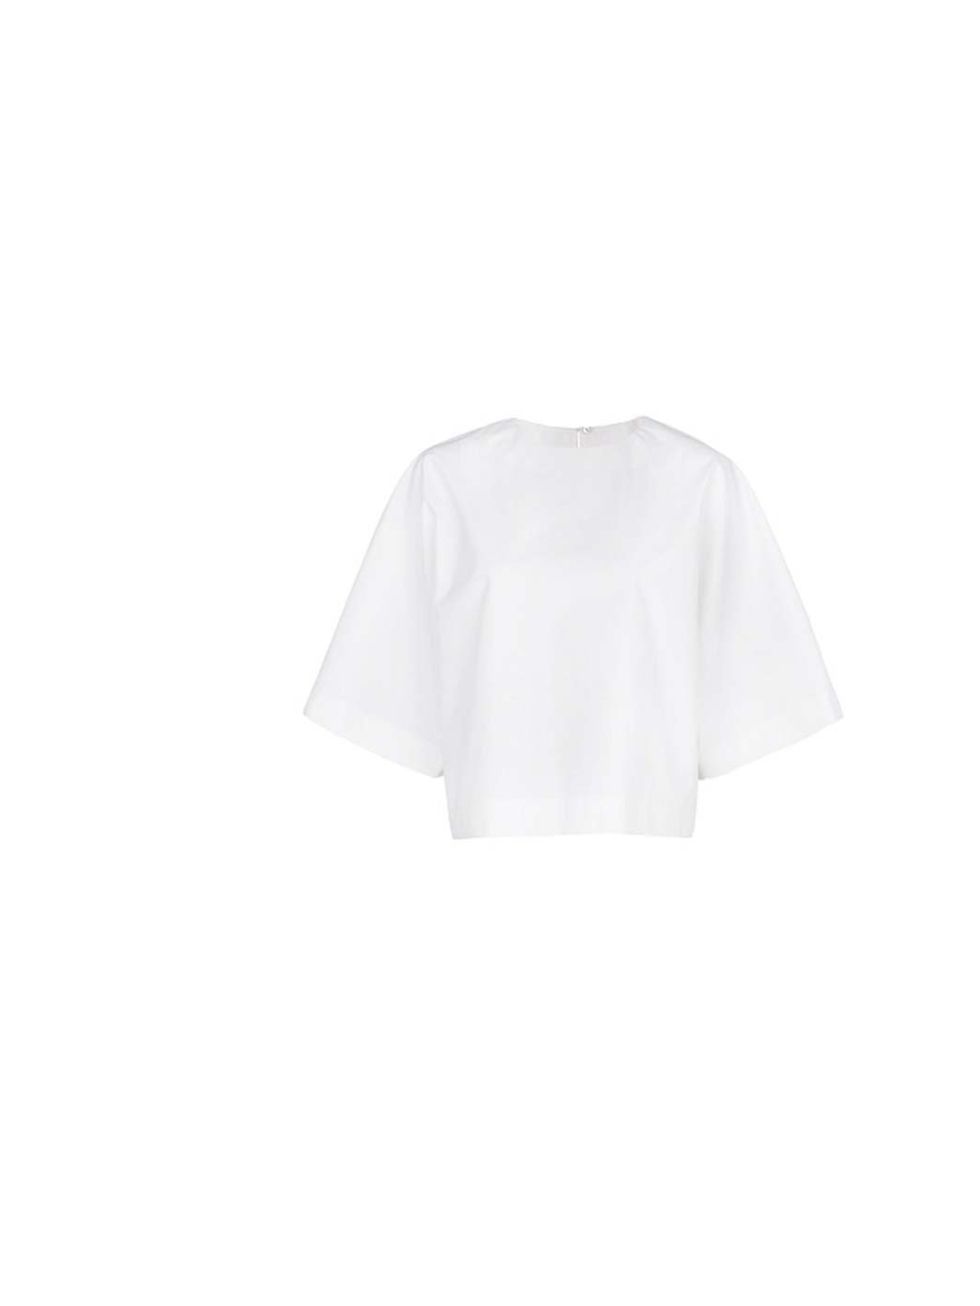 <p>Balance out the voluminous silhouette of this crisp white top with skinny jeans or tailored trousers.</p><p><a href="http://shop.mango.com/GB/p0/mango/new/premium---poplin-flared-blouse/?id=21080261_OW&n=1&s=nuevo&ident=0__0_0_1389646024722&ts=13896460